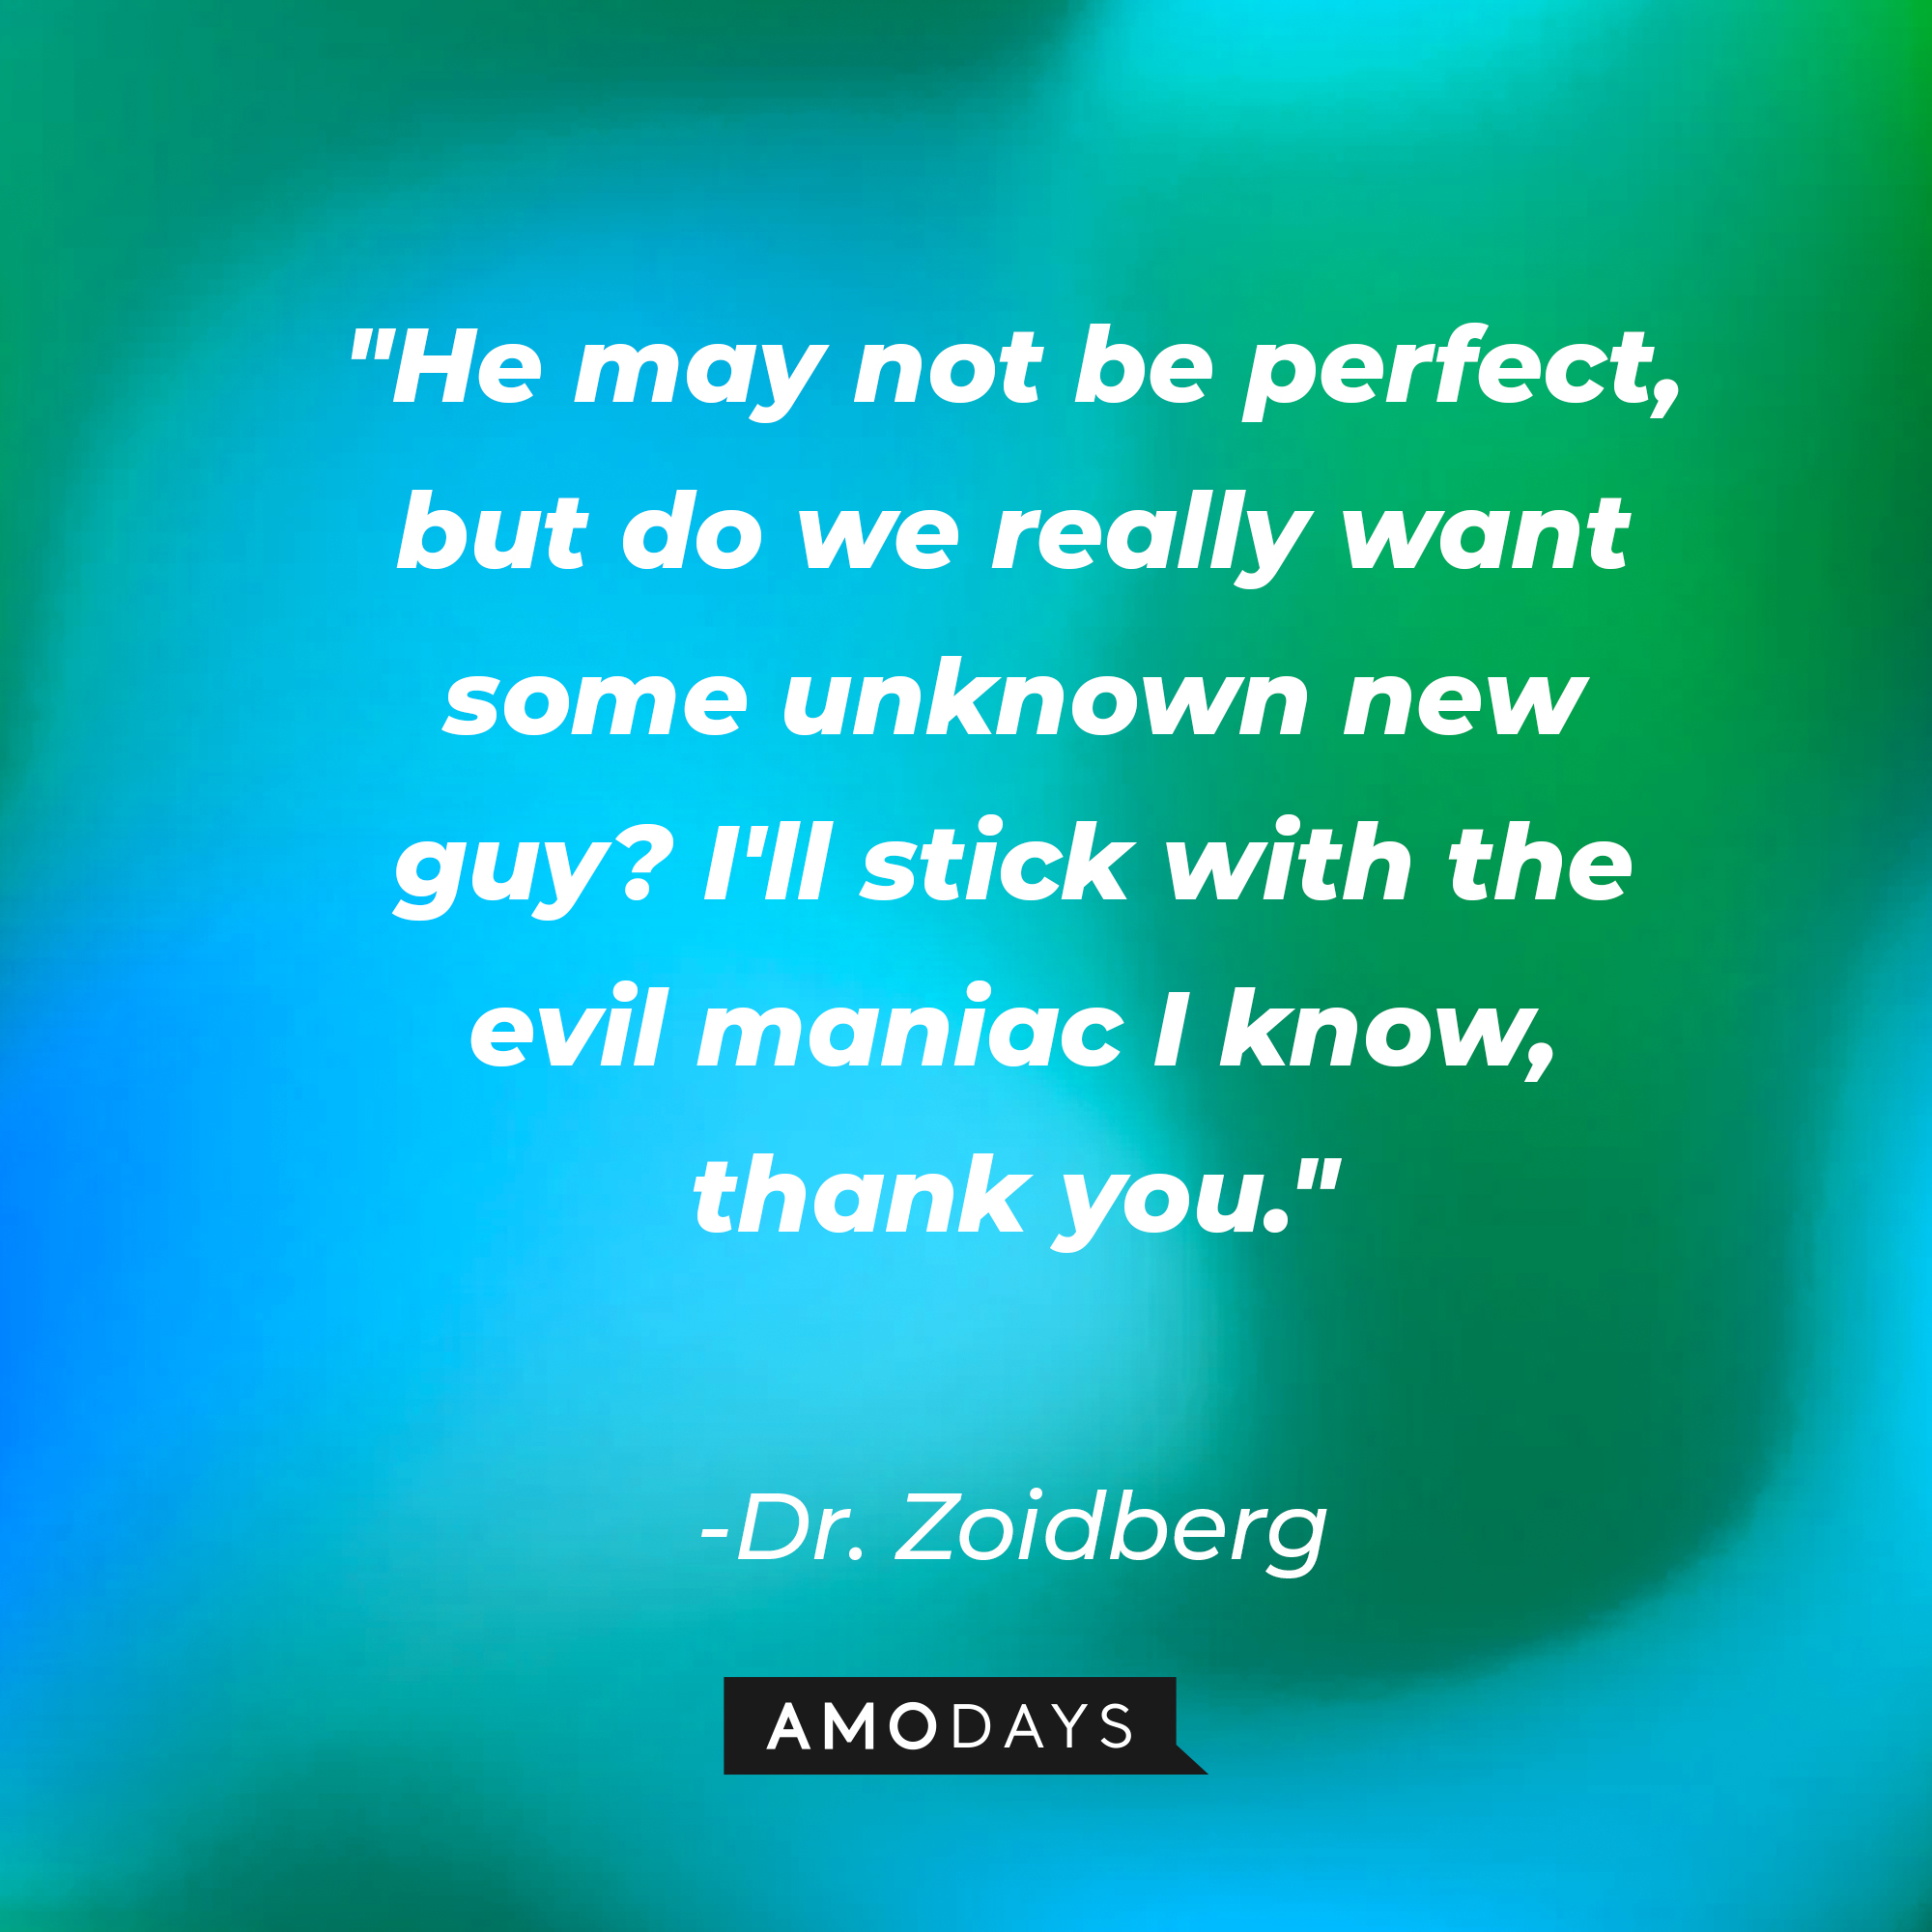 Dr. Zoidberg's quote: "He may not be perfect, but do we really want some unknown new guy? I'll stick with the evil maniac I know, thank you." | Source: AmoDays